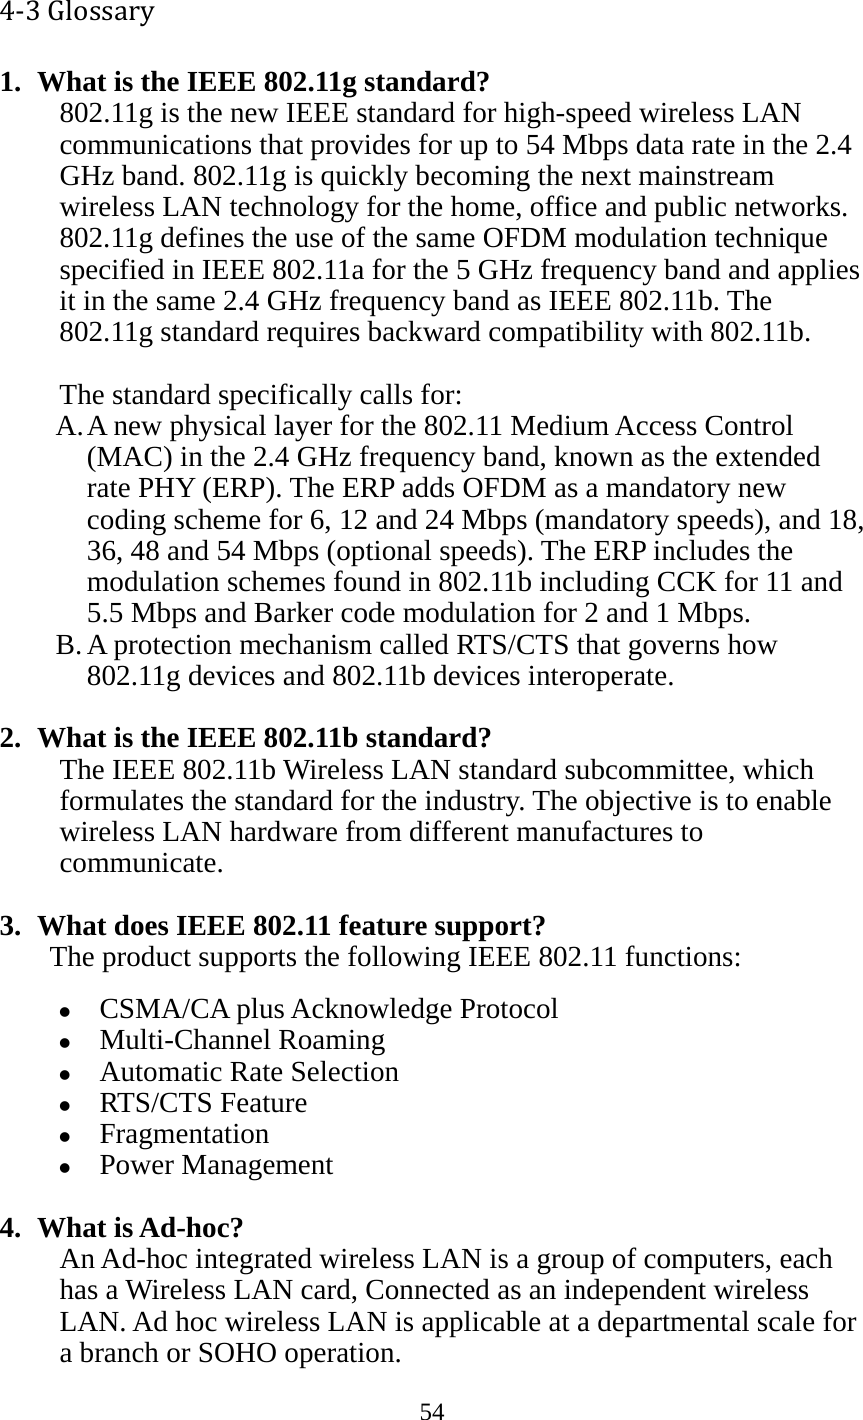 54  4‐3Glossary1. What is the IEEE 802.11g standard? 802.11g is the new IEEE standard for high-speed wireless LAN communications that provides for up to 54 Mbps data rate in the 2.4 GHz band. 802.11g is quickly becoming the next mainstream wireless LAN technology for the home, office and public networks.   802.11g defines the use of the same OFDM modulation technique specified in IEEE 802.11a for the 5 GHz frequency band and applies it in the same 2.4 GHz frequency band as IEEE 802.11b. The 802.11g standard requires backward compatibility with 802.11b.  The standard specifically calls for:   A. A new physical layer for the 802.11 Medium Access Control (MAC) in the 2.4 GHz frequency band, known as the extended rate PHY (ERP). The ERP adds OFDM as a mandatory new coding scheme for 6, 12 and 24 Mbps (mandatory speeds), and 18, 36, 48 and 54 Mbps (optional speeds). The ERP includes the modulation schemes found in 802.11b including CCK for 11 and 5.5 Mbps and Barker code modulation for 2 and 1 Mbps. B. A protection mechanism called RTS/CTS that governs how 802.11g devices and 802.11b devices interoperate.  2. What is the IEEE 802.11b standard? The IEEE 802.11b Wireless LAN standard subcommittee, which formulates the standard for the industry. The objective is to enable wireless LAN hardware from different manufactures to communicate.  3. What does IEEE 802.11 feature support? The product supports the following IEEE 802.11 functions: z CSMA/CA plus Acknowledge Protocol z Multi-Channel Roaming z Automatic Rate Selection z RTS/CTS Feature z Fragmentation z Power Management  4. What is Ad-hoc? An Ad-hoc integrated wireless LAN is a group of computers, each has a Wireless LAN card, Connected as an independent wireless LAN. Ad hoc wireless LAN is applicable at a departmental scale for a branch or SOHO operation. 